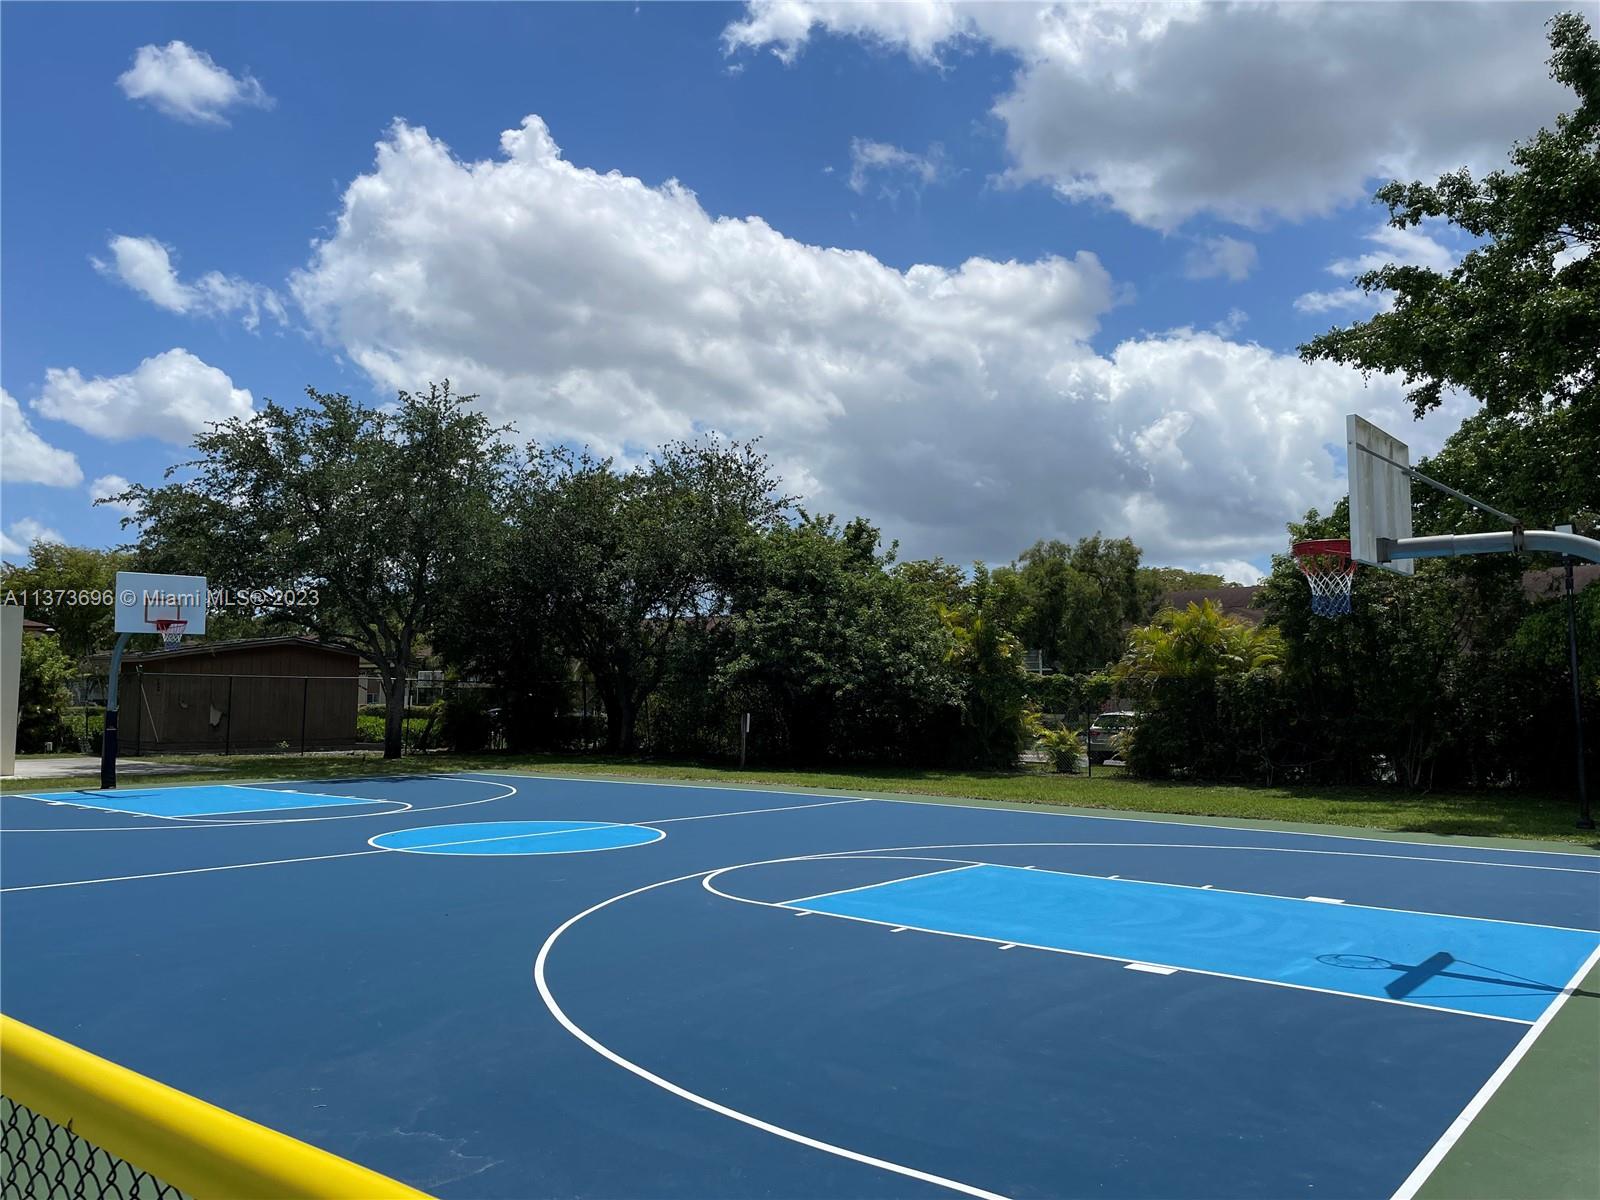 Basketball court,Other